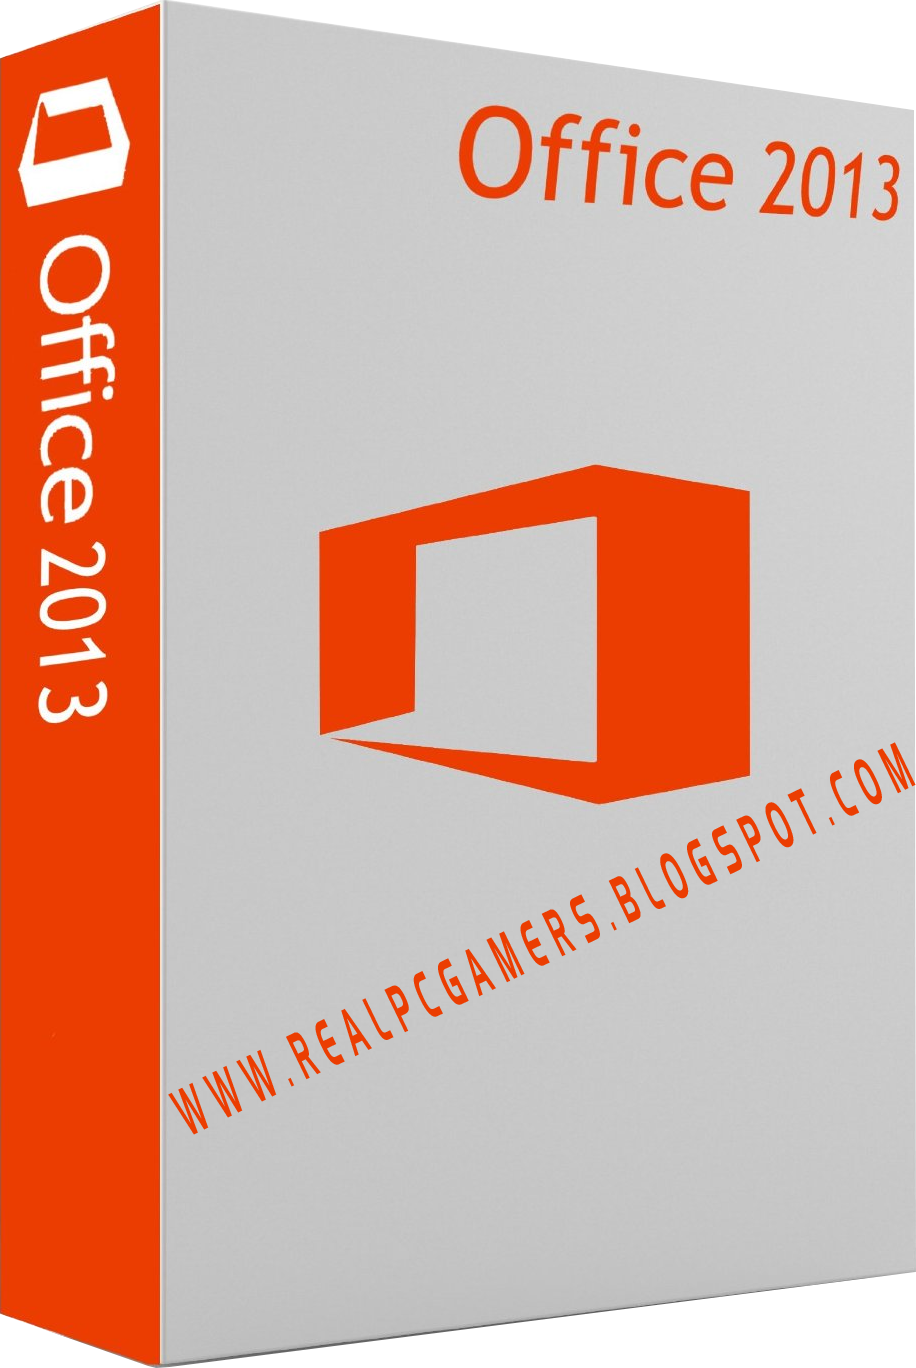 Office 2013 Portable